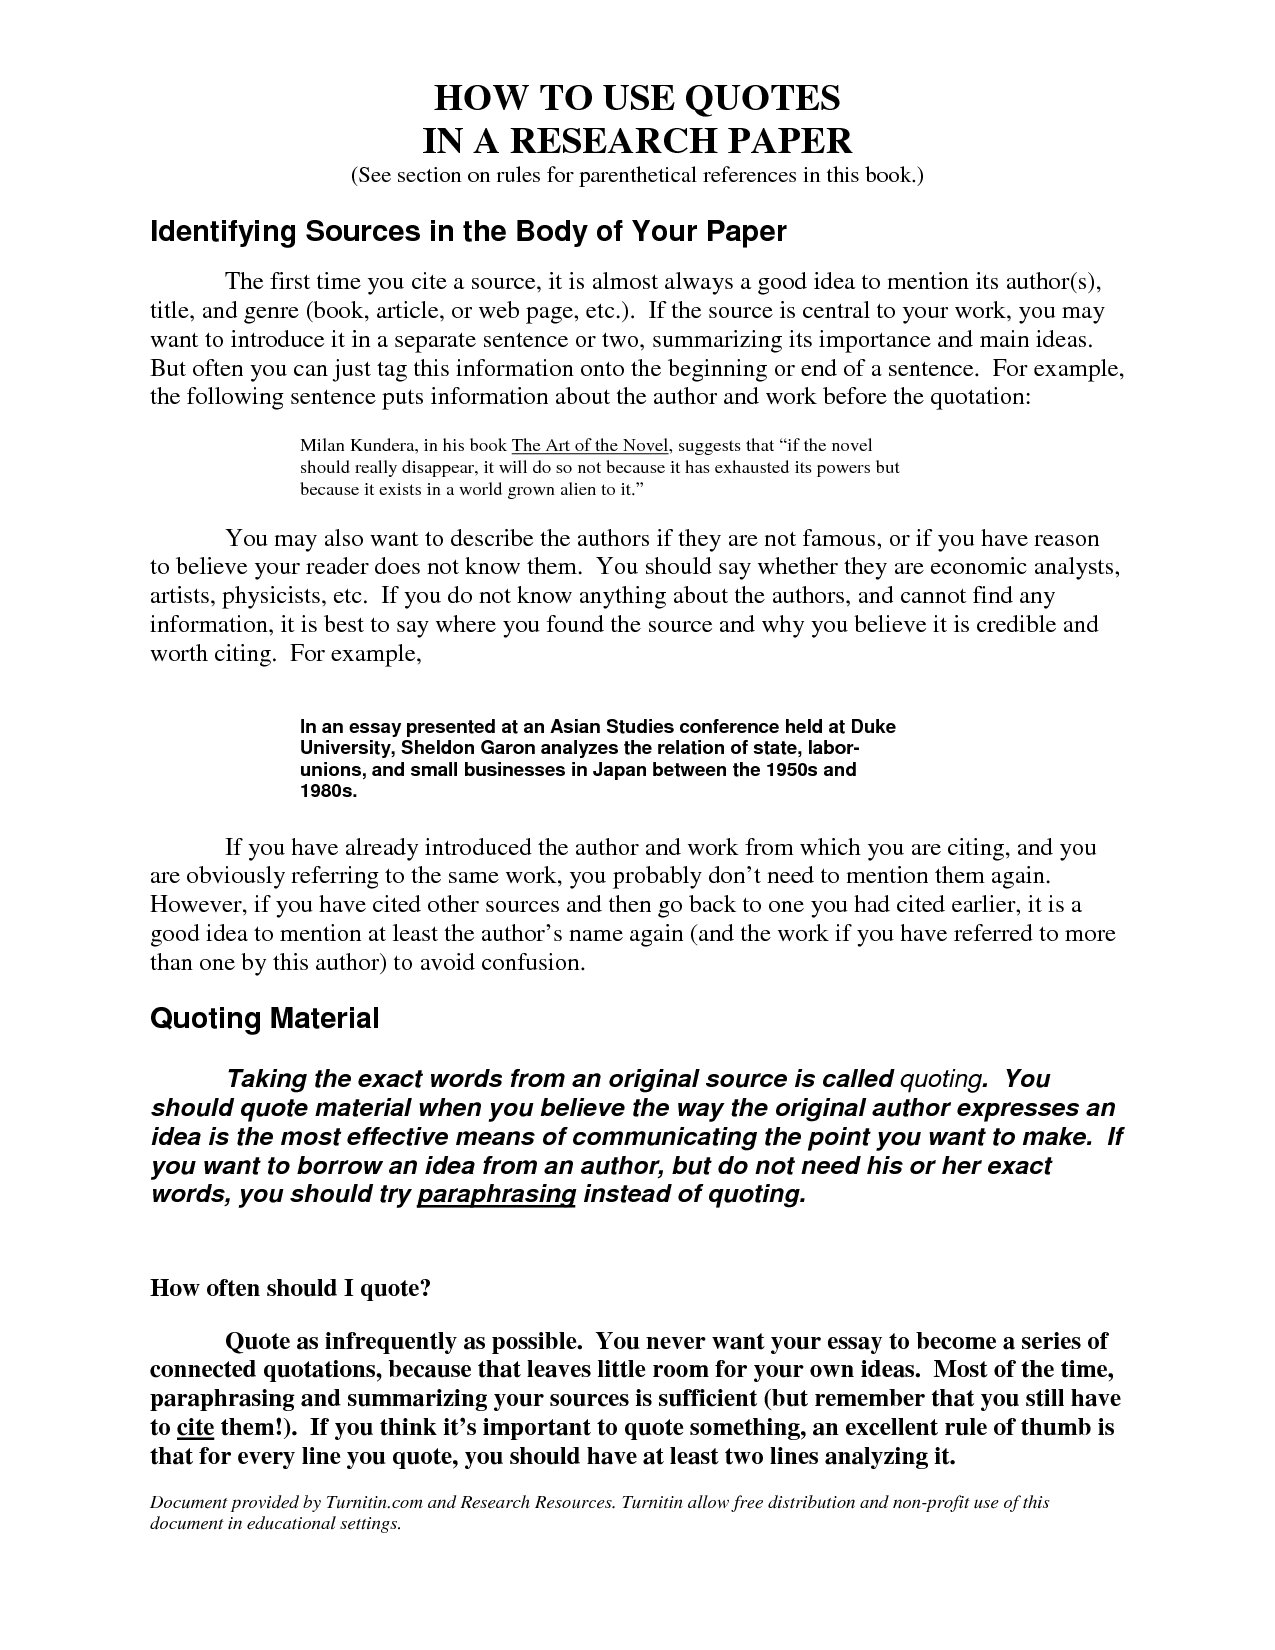 Essay Form and Structure: How to Write an Essay - Owlcation - Education